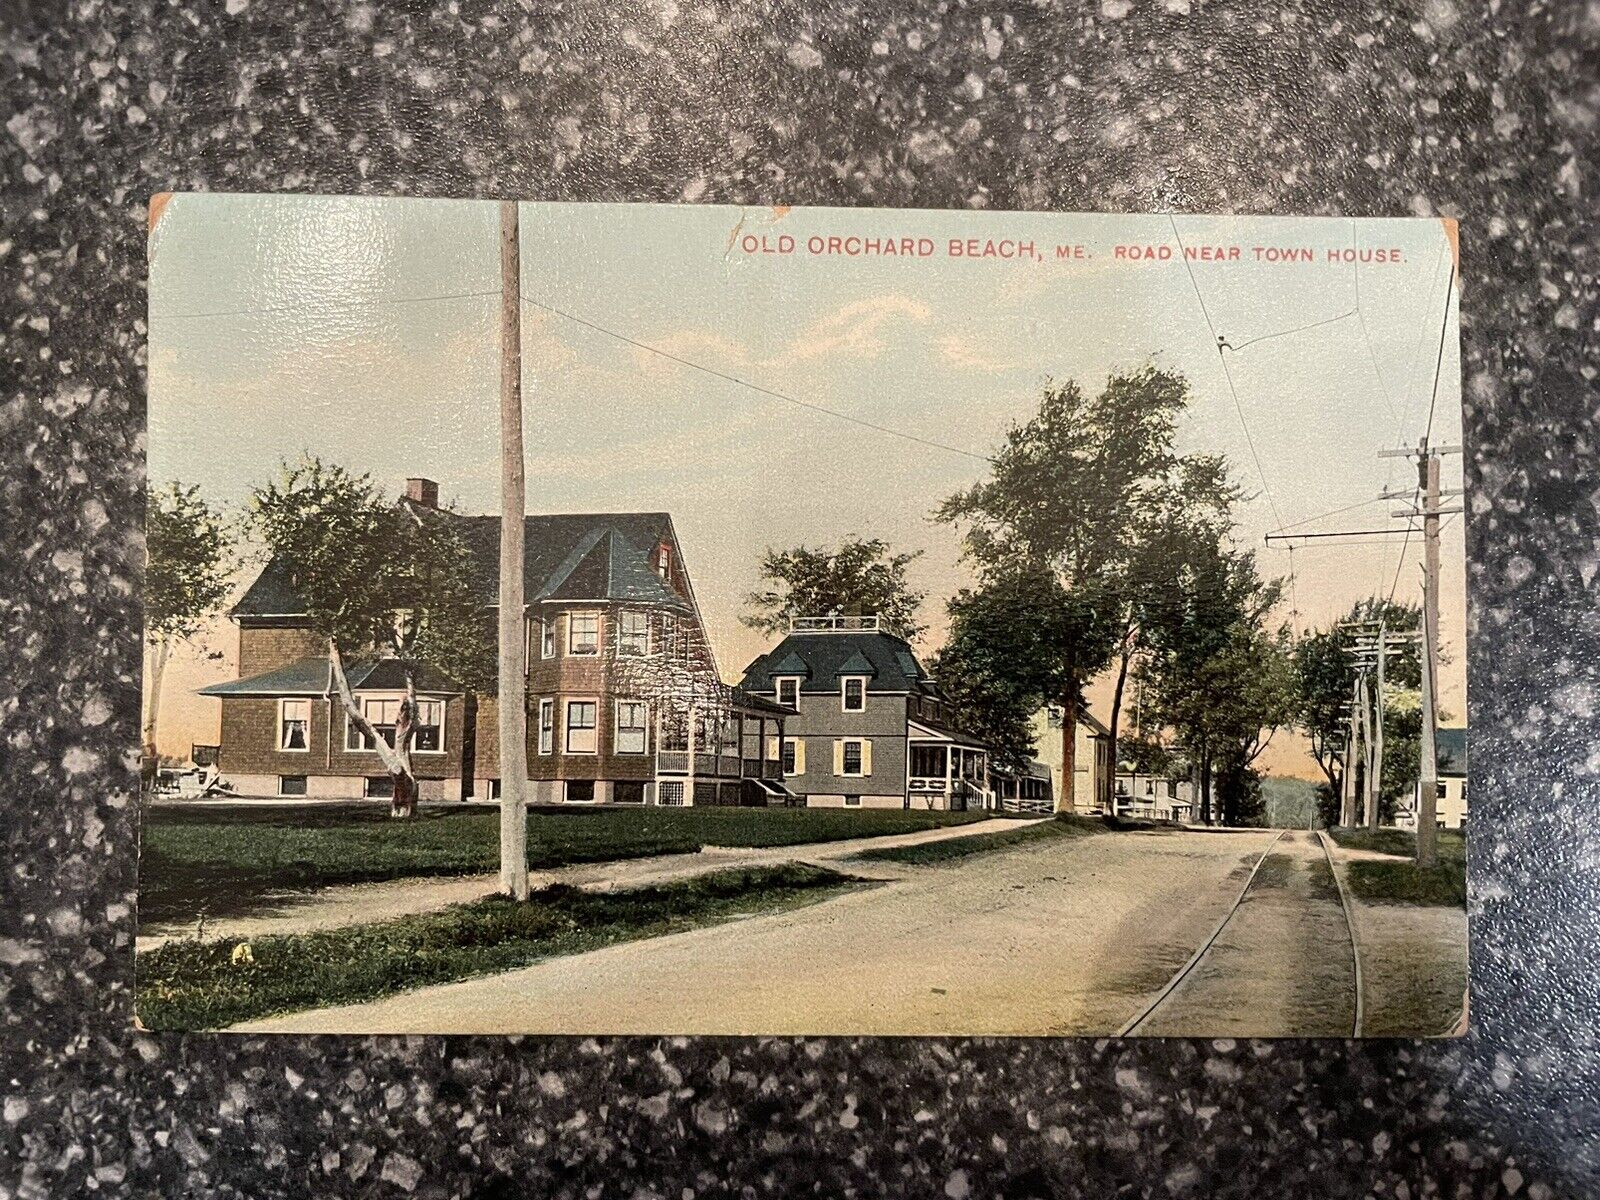 Old Orchard Beach Maine Postcard Vintage Posted Road Near Town House